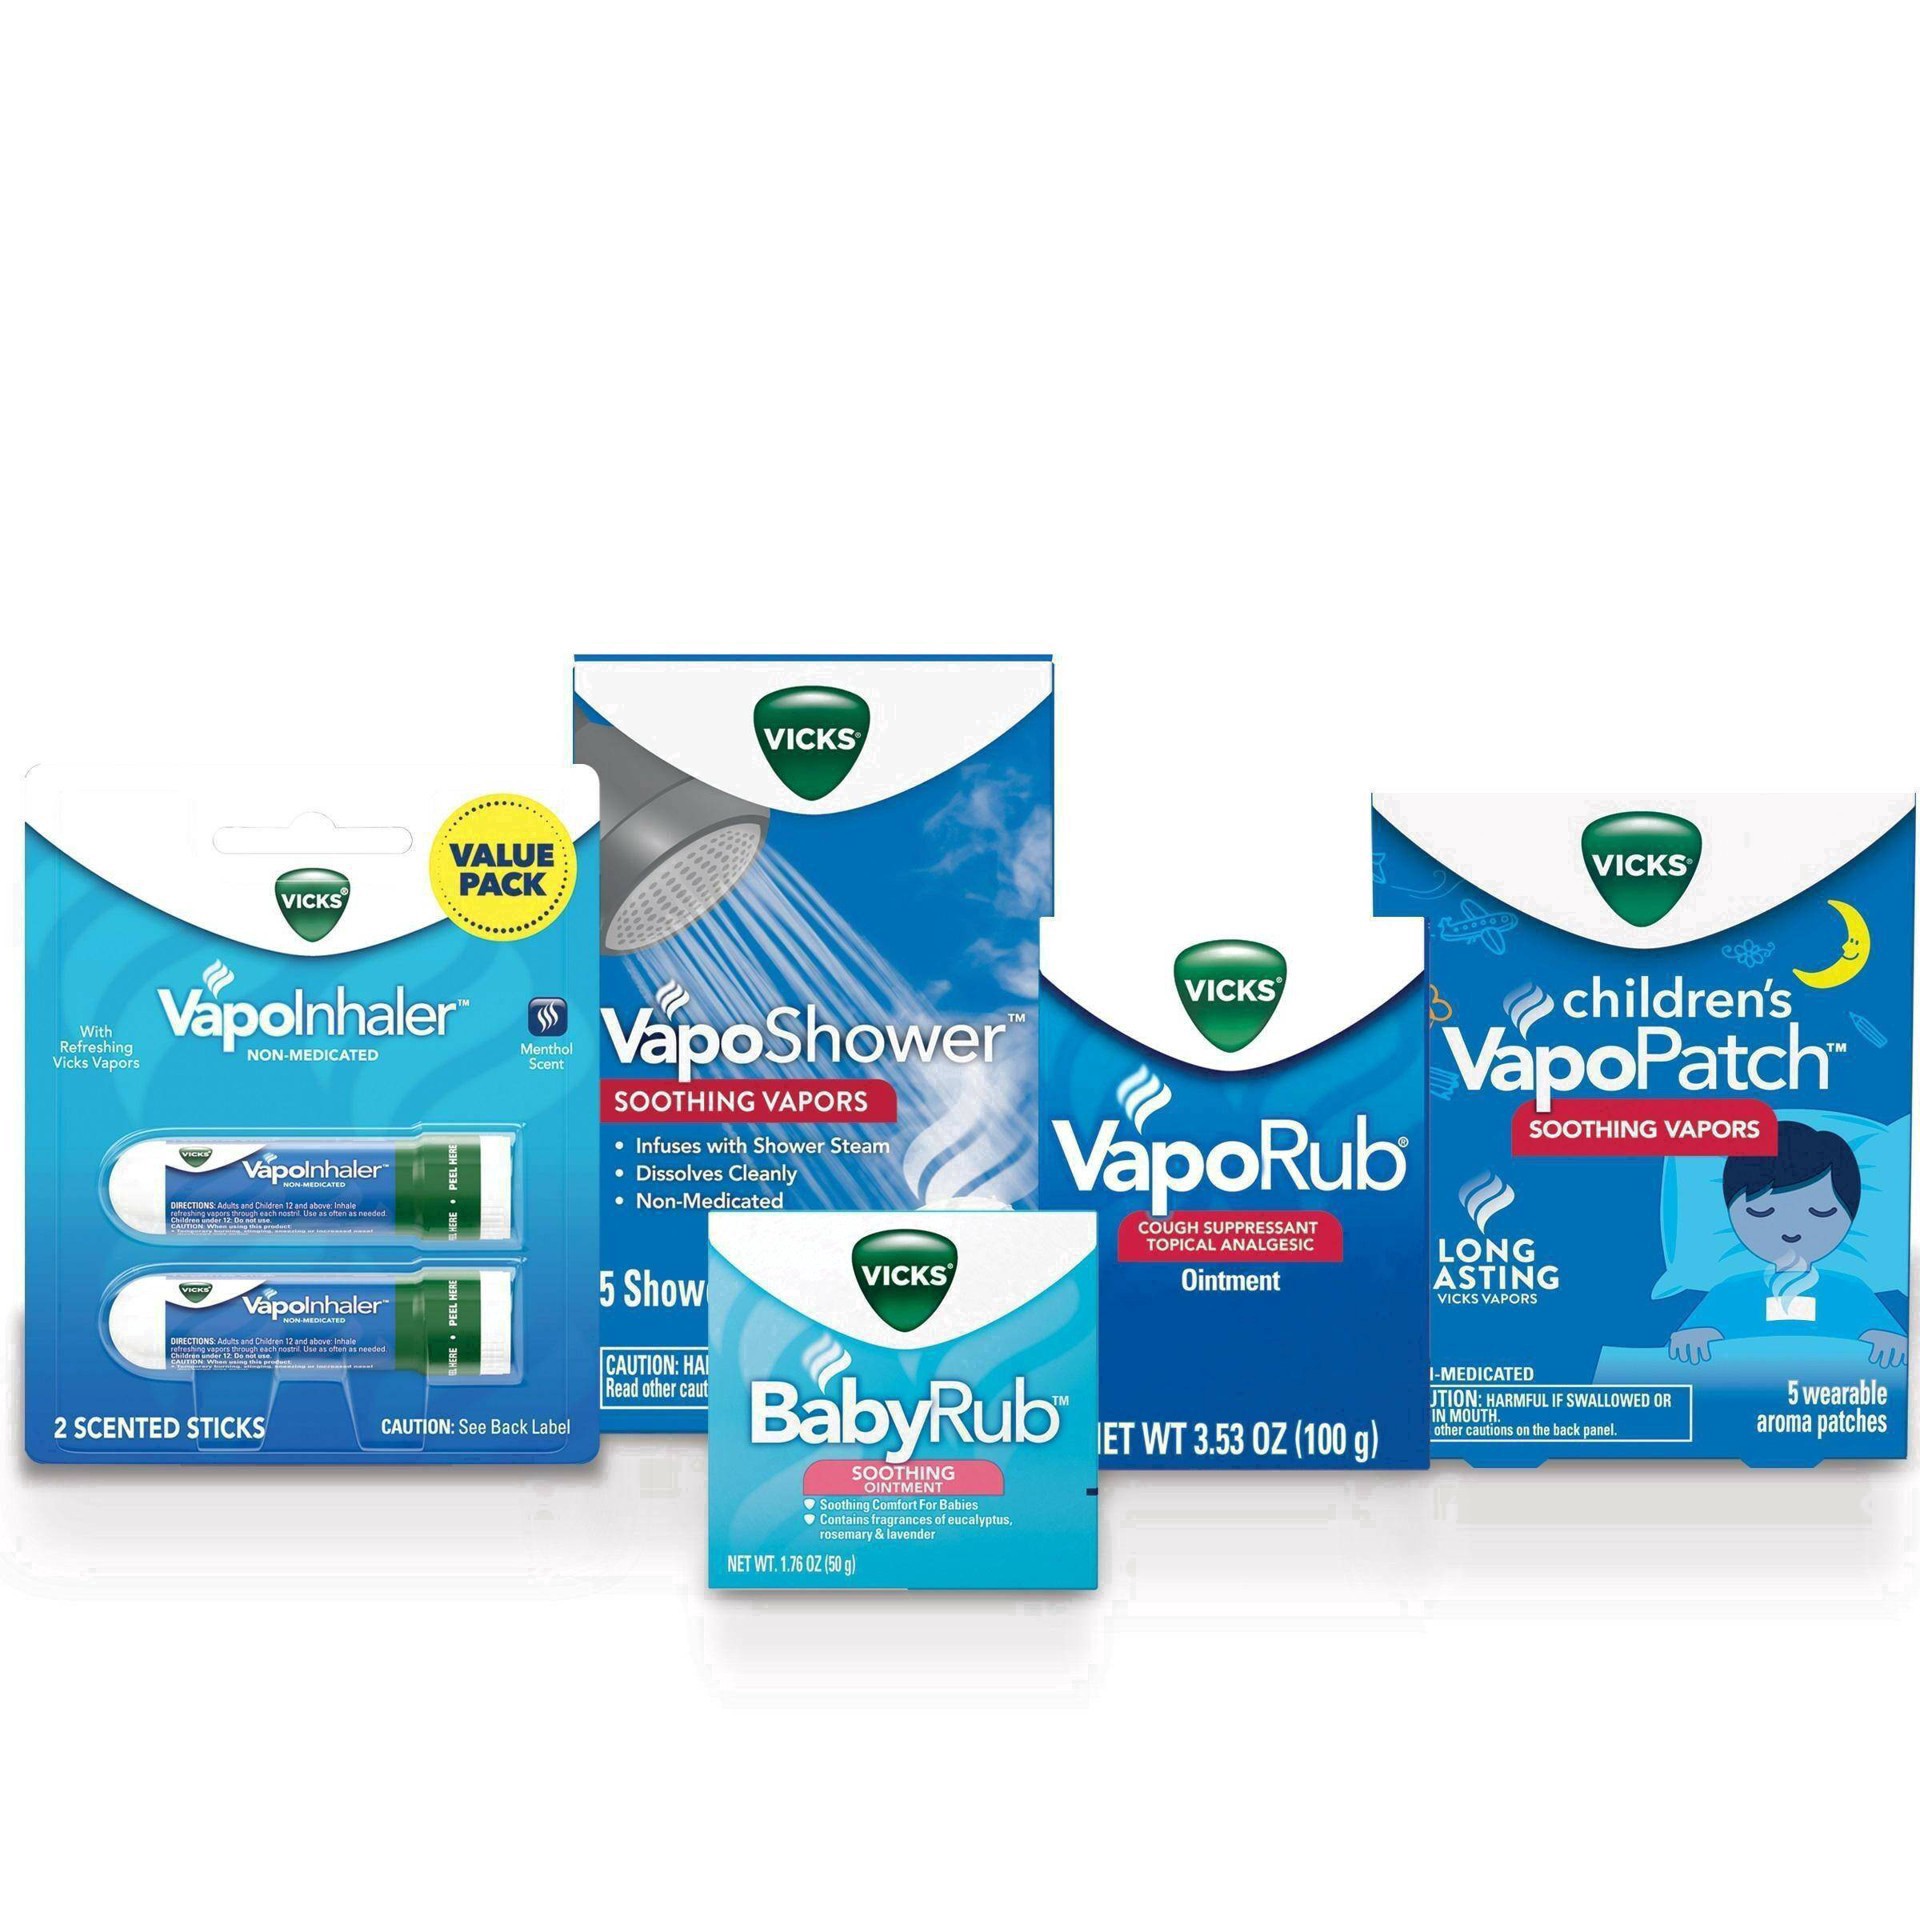 slide 25 of 37, Vicks Children's VapoPatch with Long Lasting Soothing Vapors - Menthol - 5ct, 5 ct